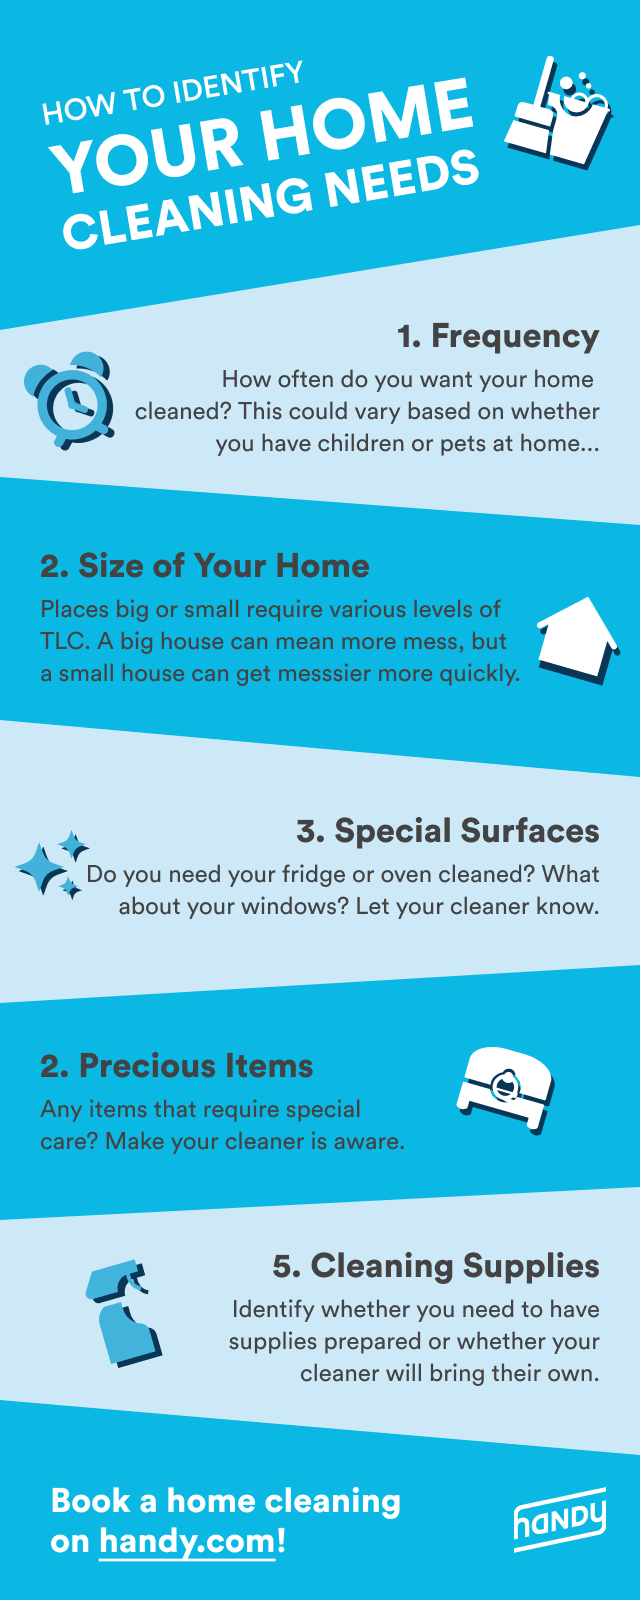 How to identify your home cleaning needs